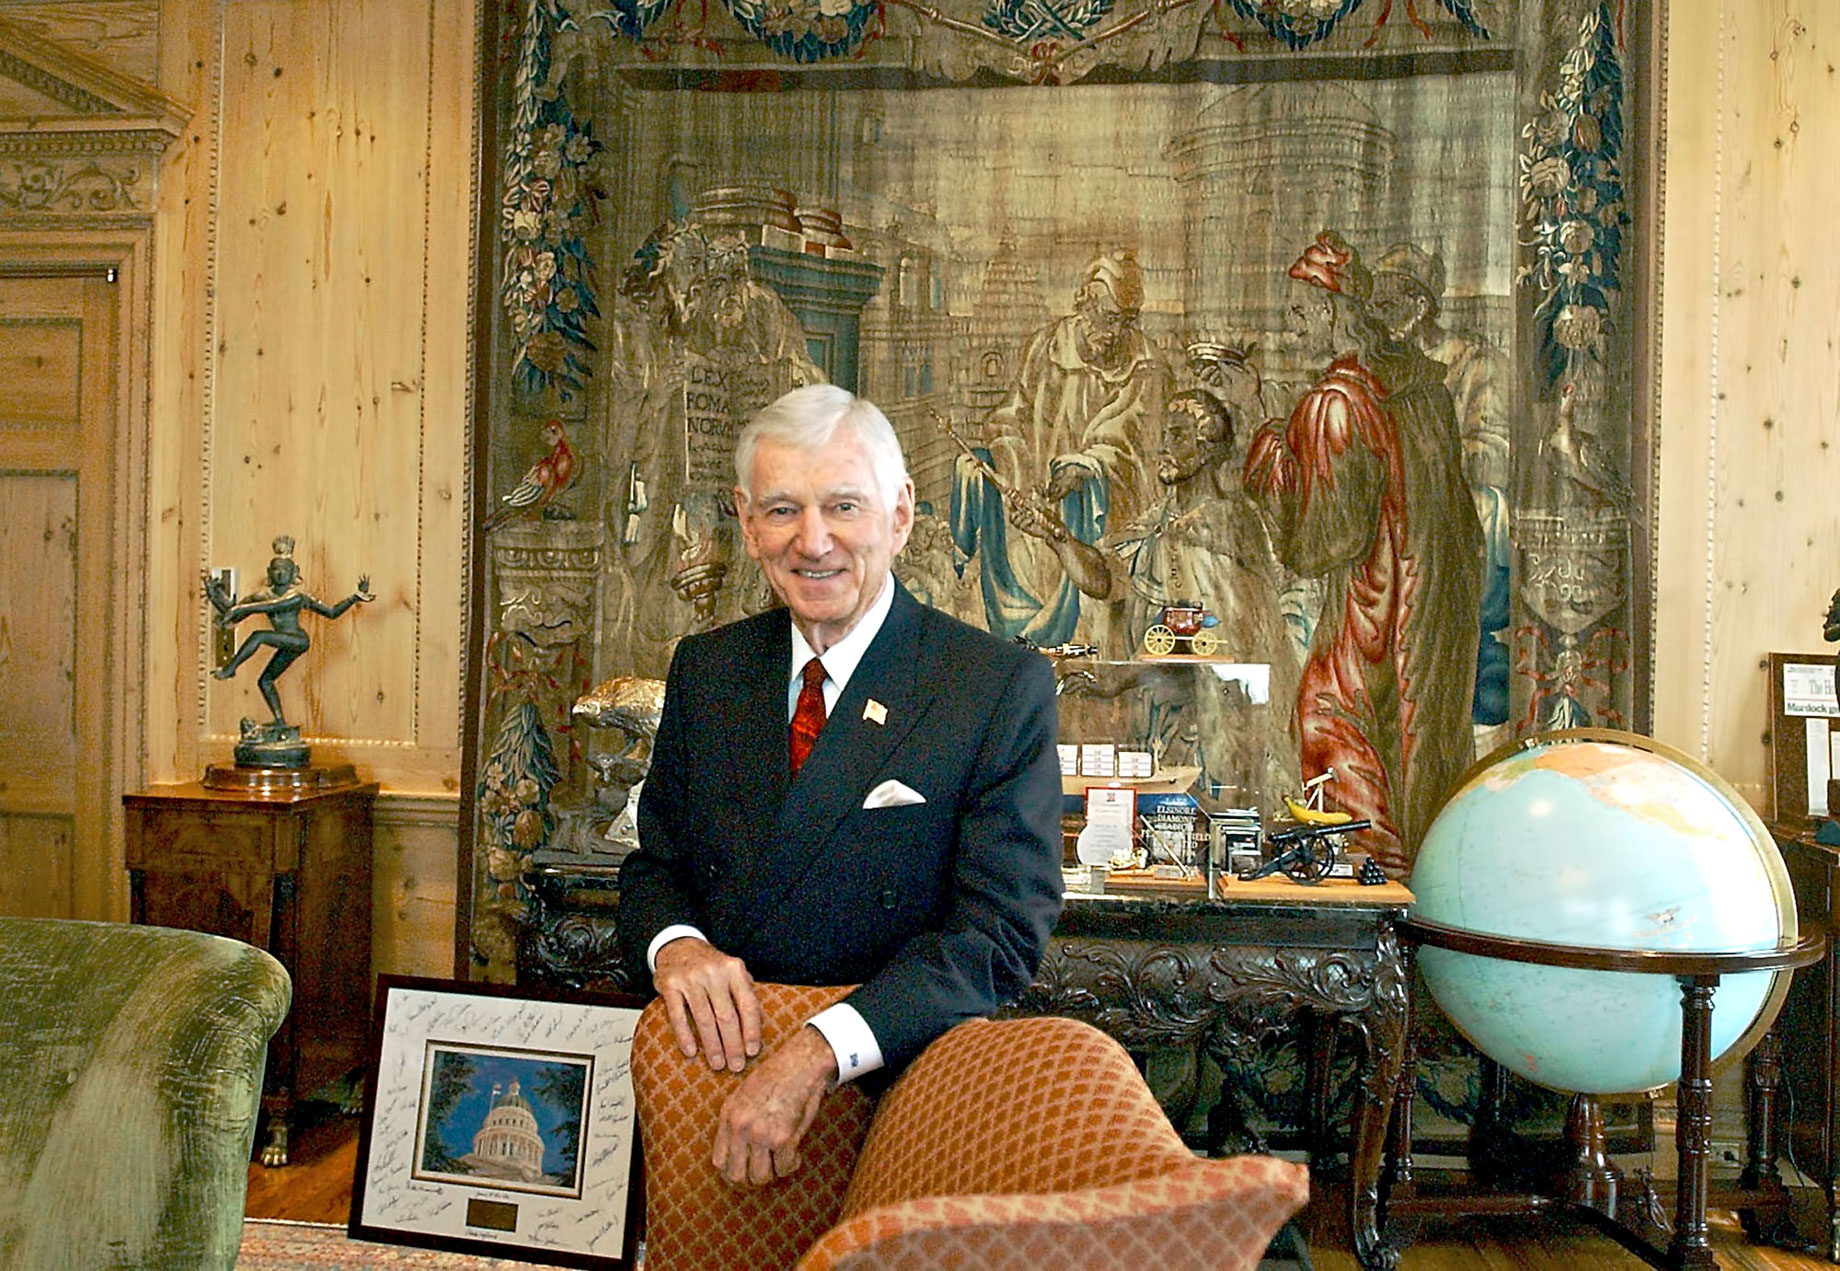 David H. Murdock Billionaire CEO of Castle and Cooke - Lanai - The Most Expensive Private Island Real Estate Transaction in History